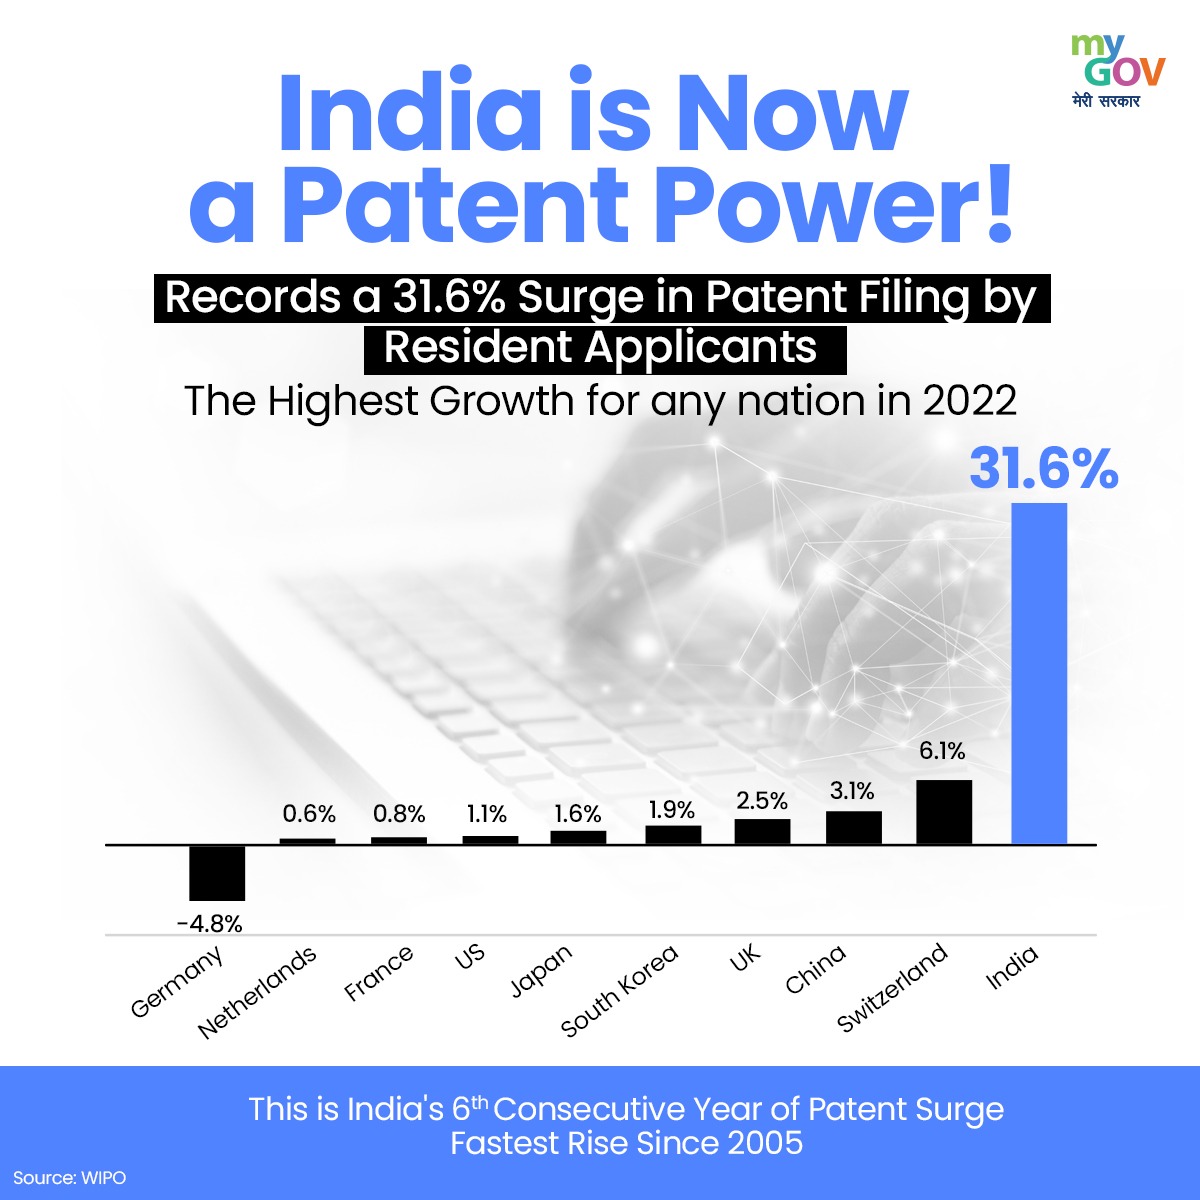 India's patent power is soaring high! With a remarkable 31.6% surge in patent filings by resident applicants, India achieves the highest growth rate among nations in 2022. #PatentPower #NewIndia #Patent